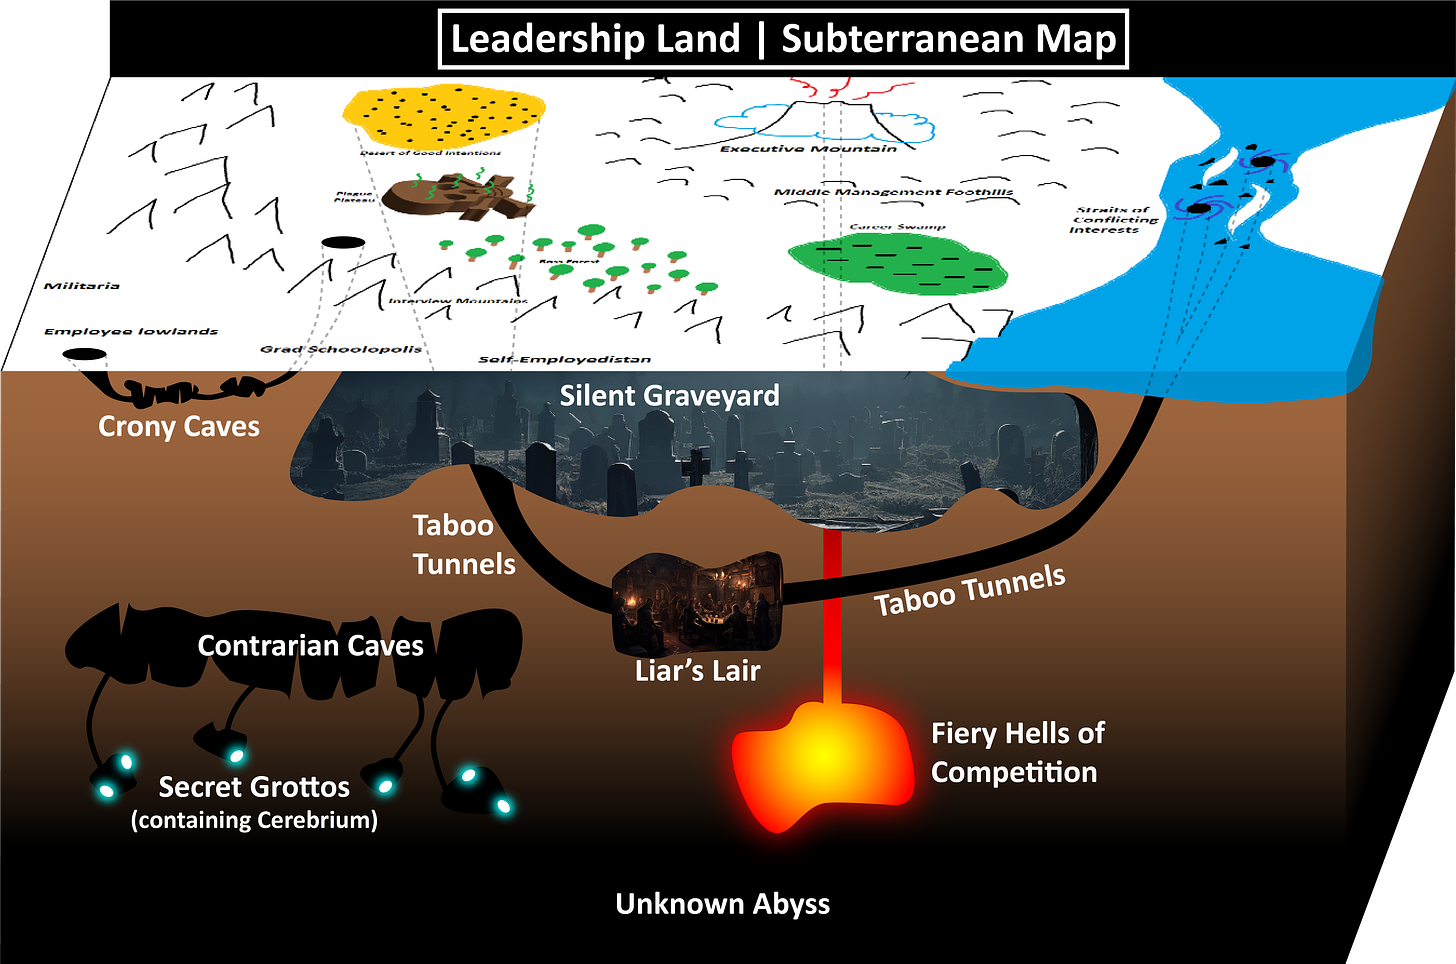 Cross-section not to scale. Subterranean features are subject to geology puns. Ask your volcanologist if this map is left for you (yes). Side effects may include claustrophobia, pyrophobia, thalassophobia, phasmophobia, spelunkephobia, phobophobia, and panphobia.